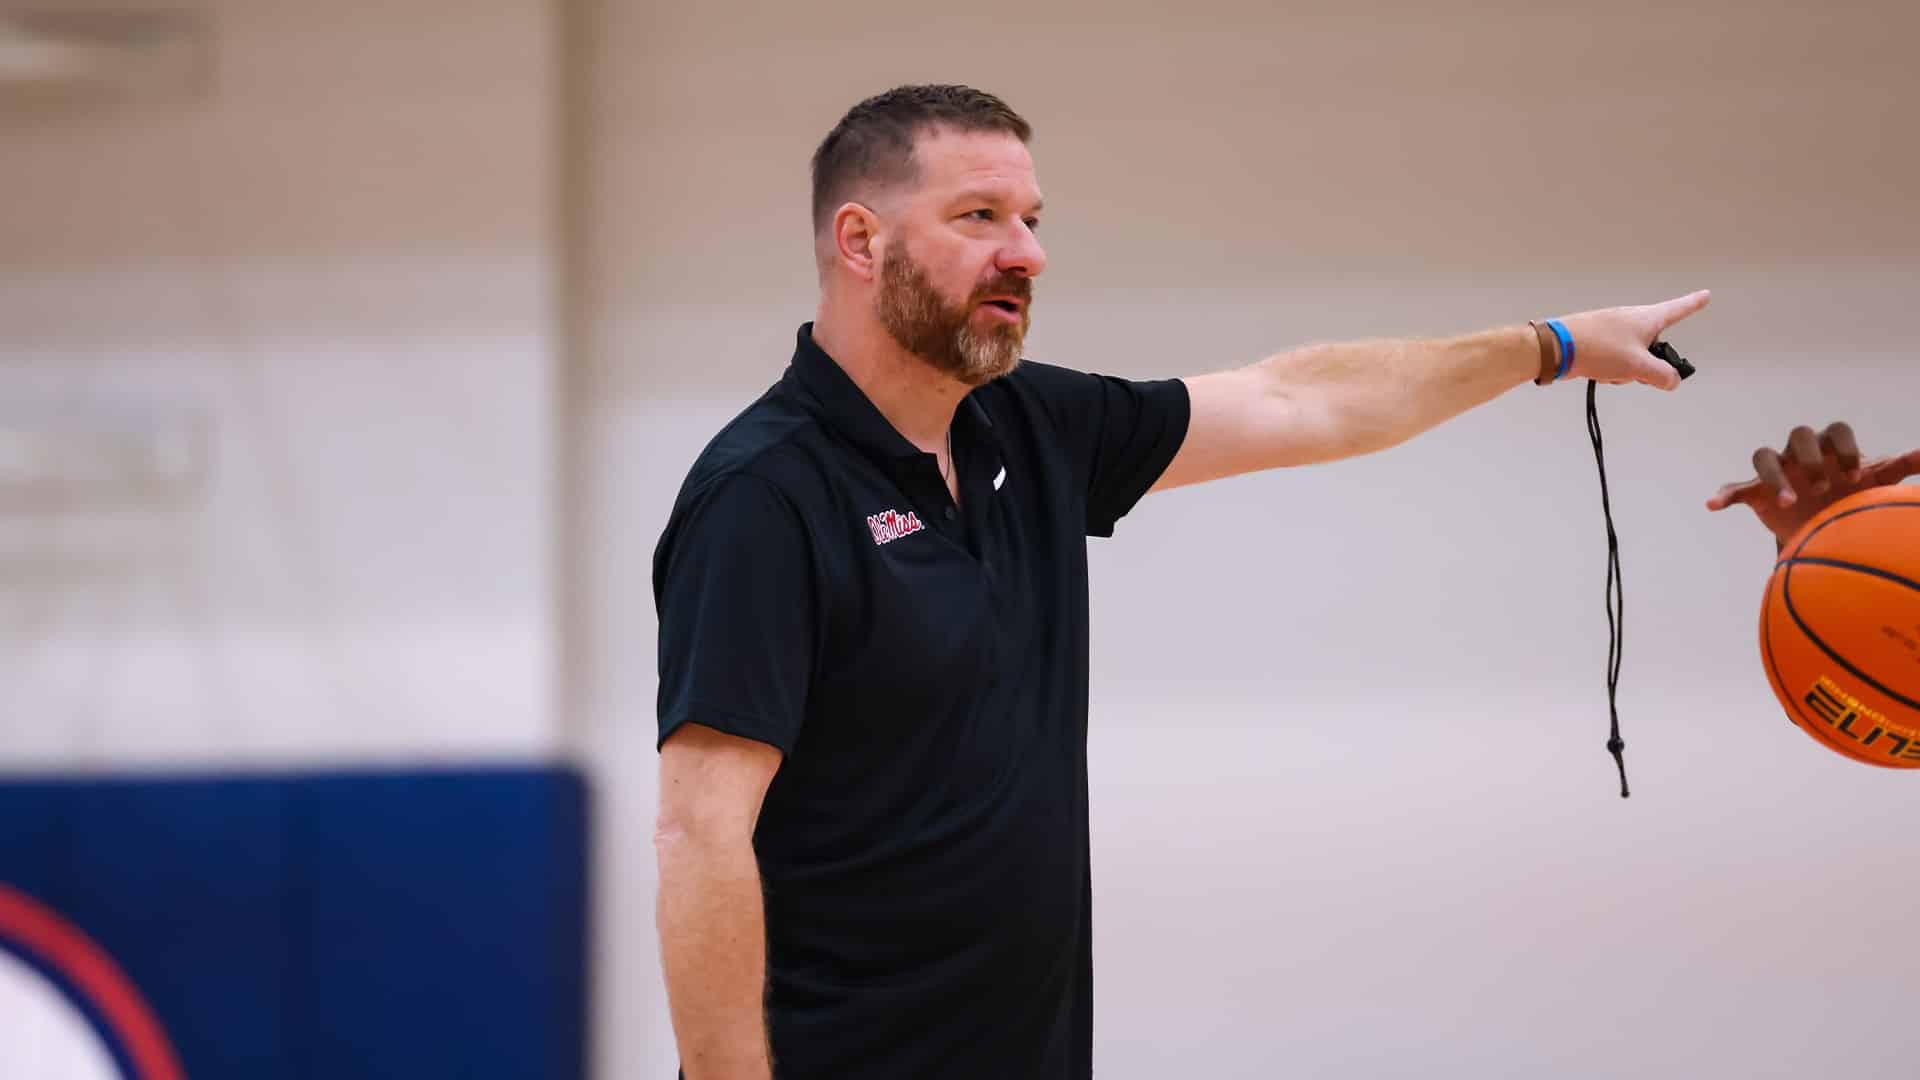 The timing is just not right': Chris Beard withdraws Ole Miss basketball  from NIT consideration - SuperTalk Mississippi